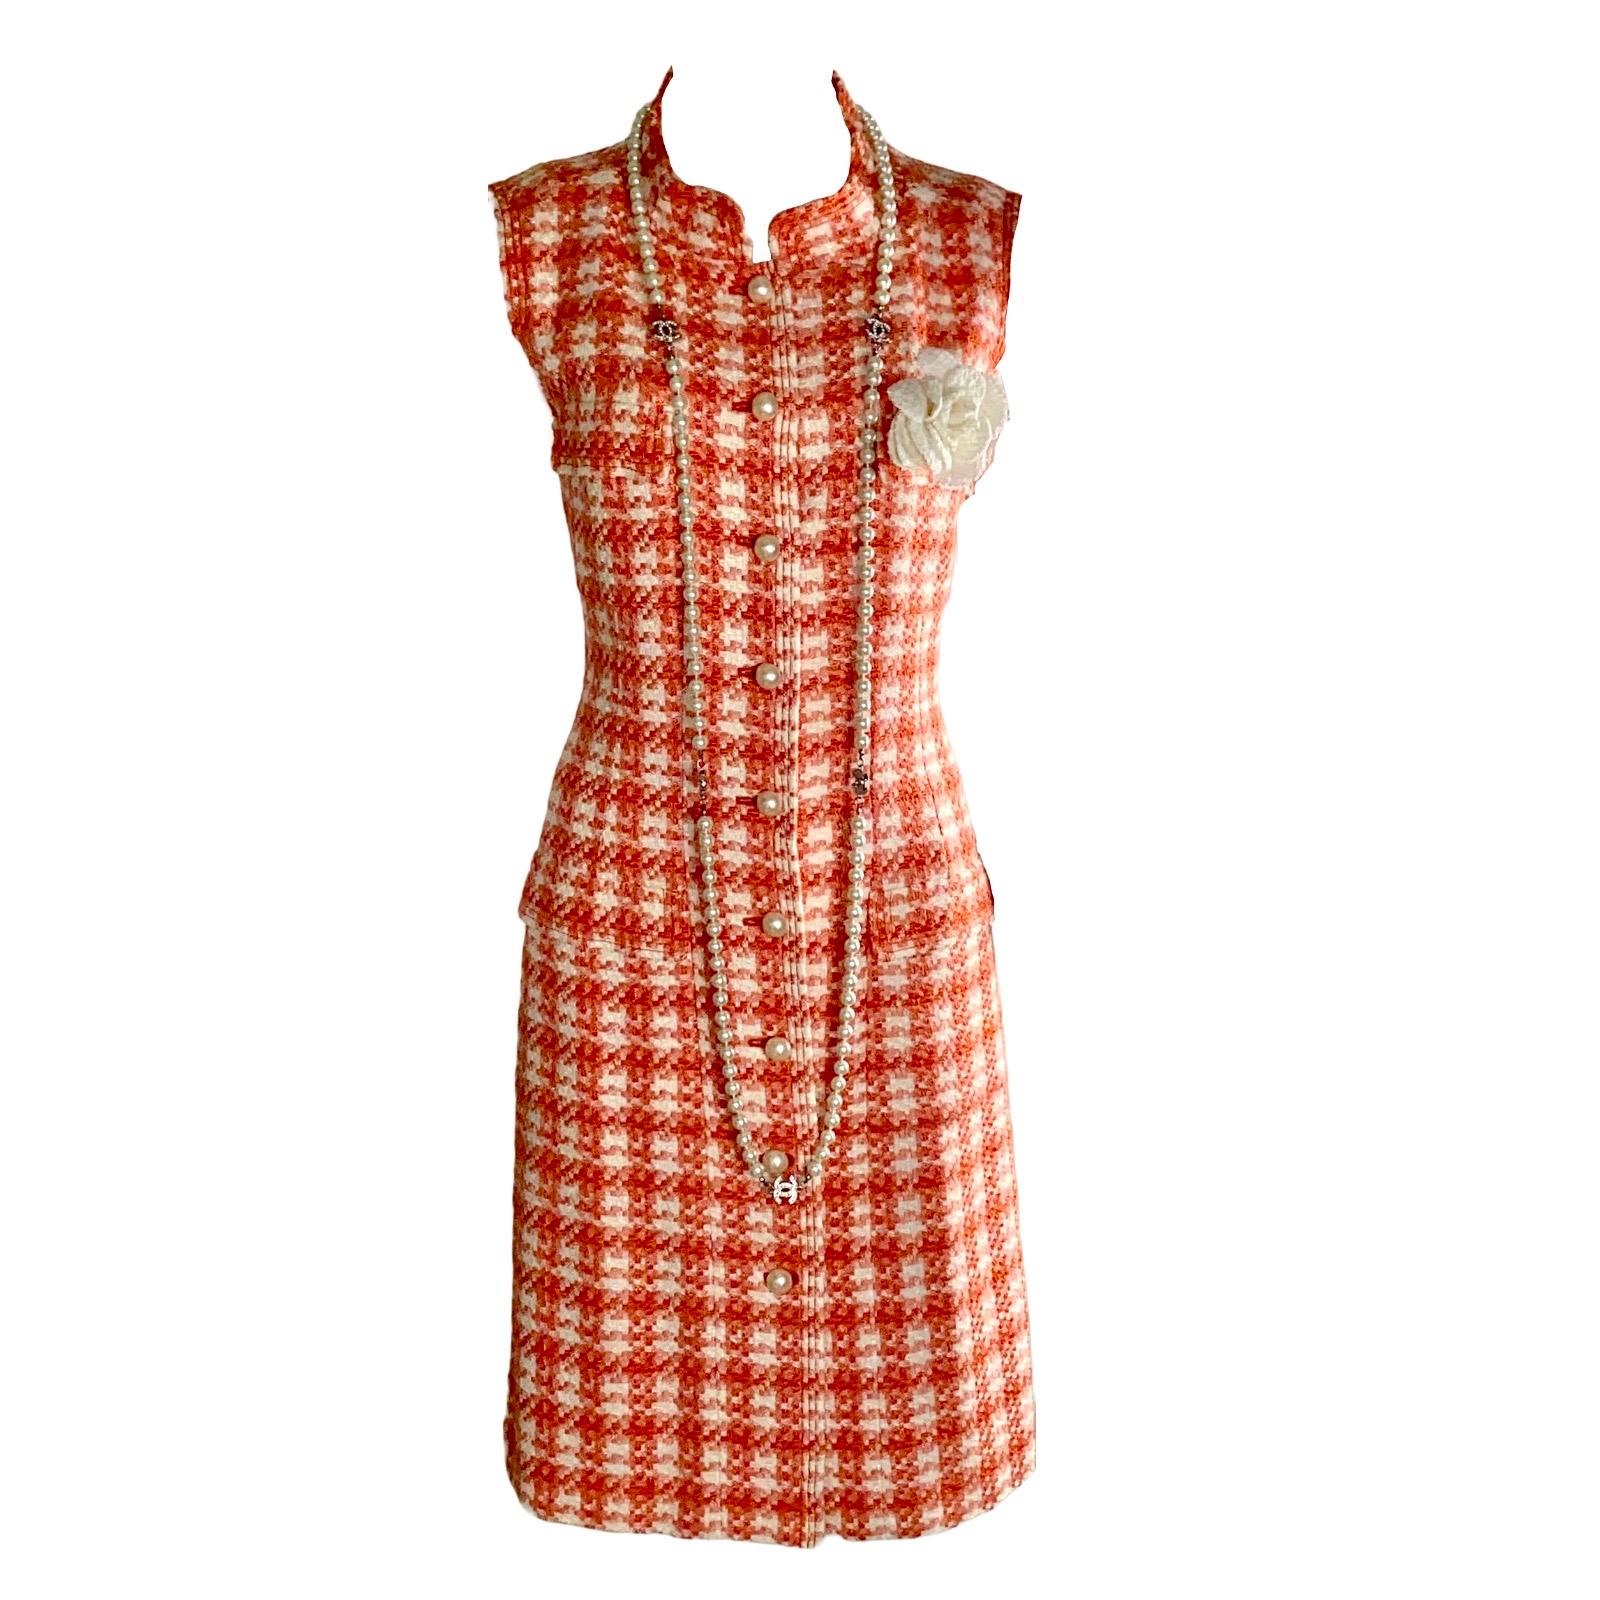 CHANEL tweed dress
Classic Chanel signature piece - a timeless classic that will last for many years
Beautiful colors - coral & ivory
Comes with detachable Camellia brooch
Made in France
Dry Clean Only
Size 40
Fashion jewelry not included